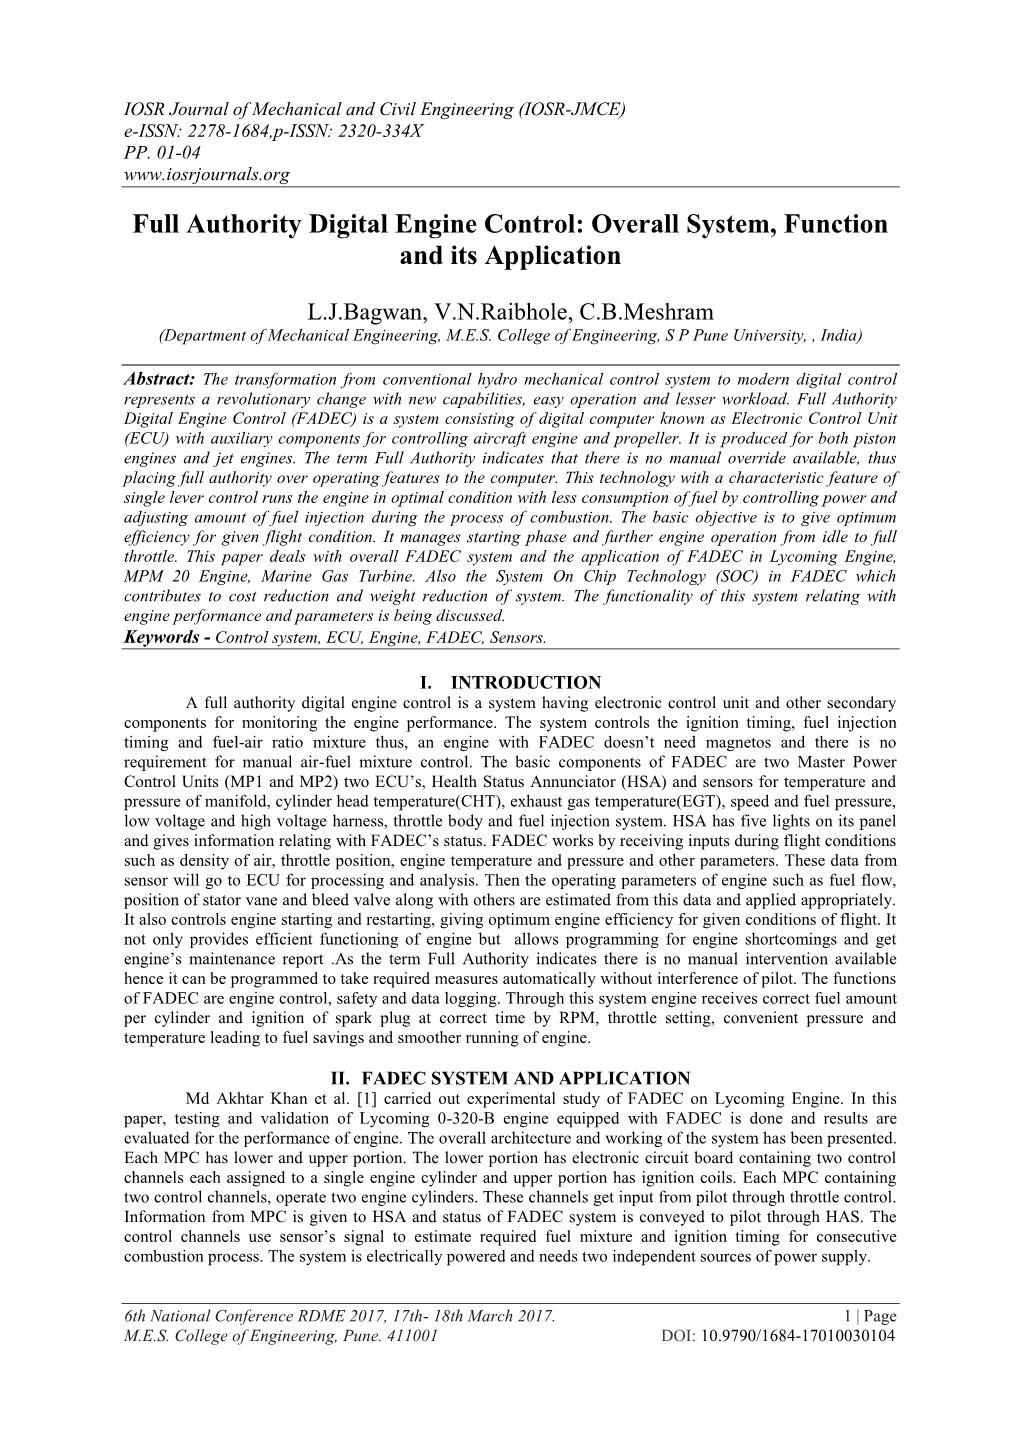 Full Authority Digital Engine Control: Overall System, Function and Its Application